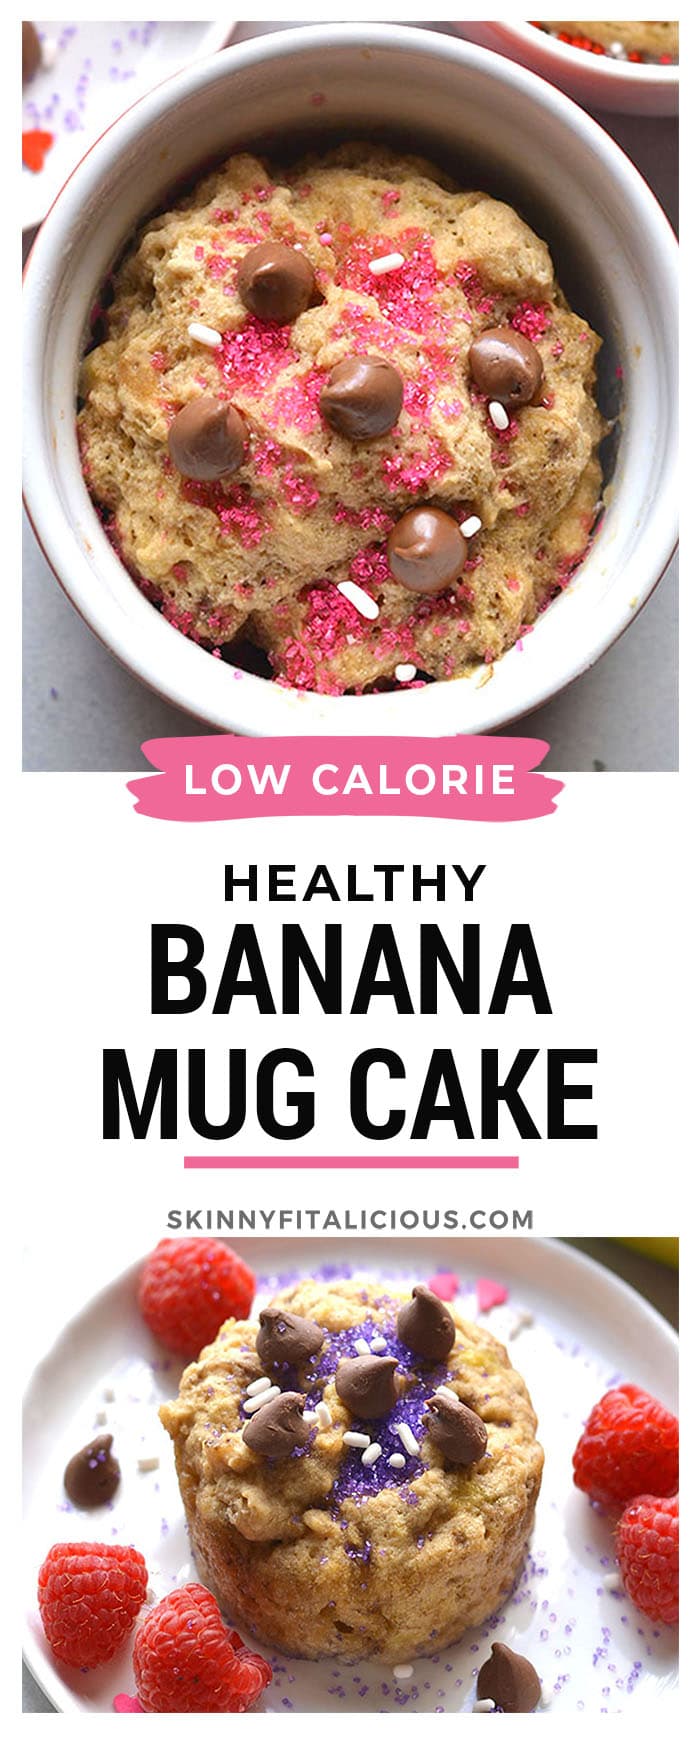 This Healthy Banana Mug Cake is perfect for a single serve, low calorie dessert or snack. Made flourless, gluten free and low sugar in the microwave. Gluten Free + Low Calorie